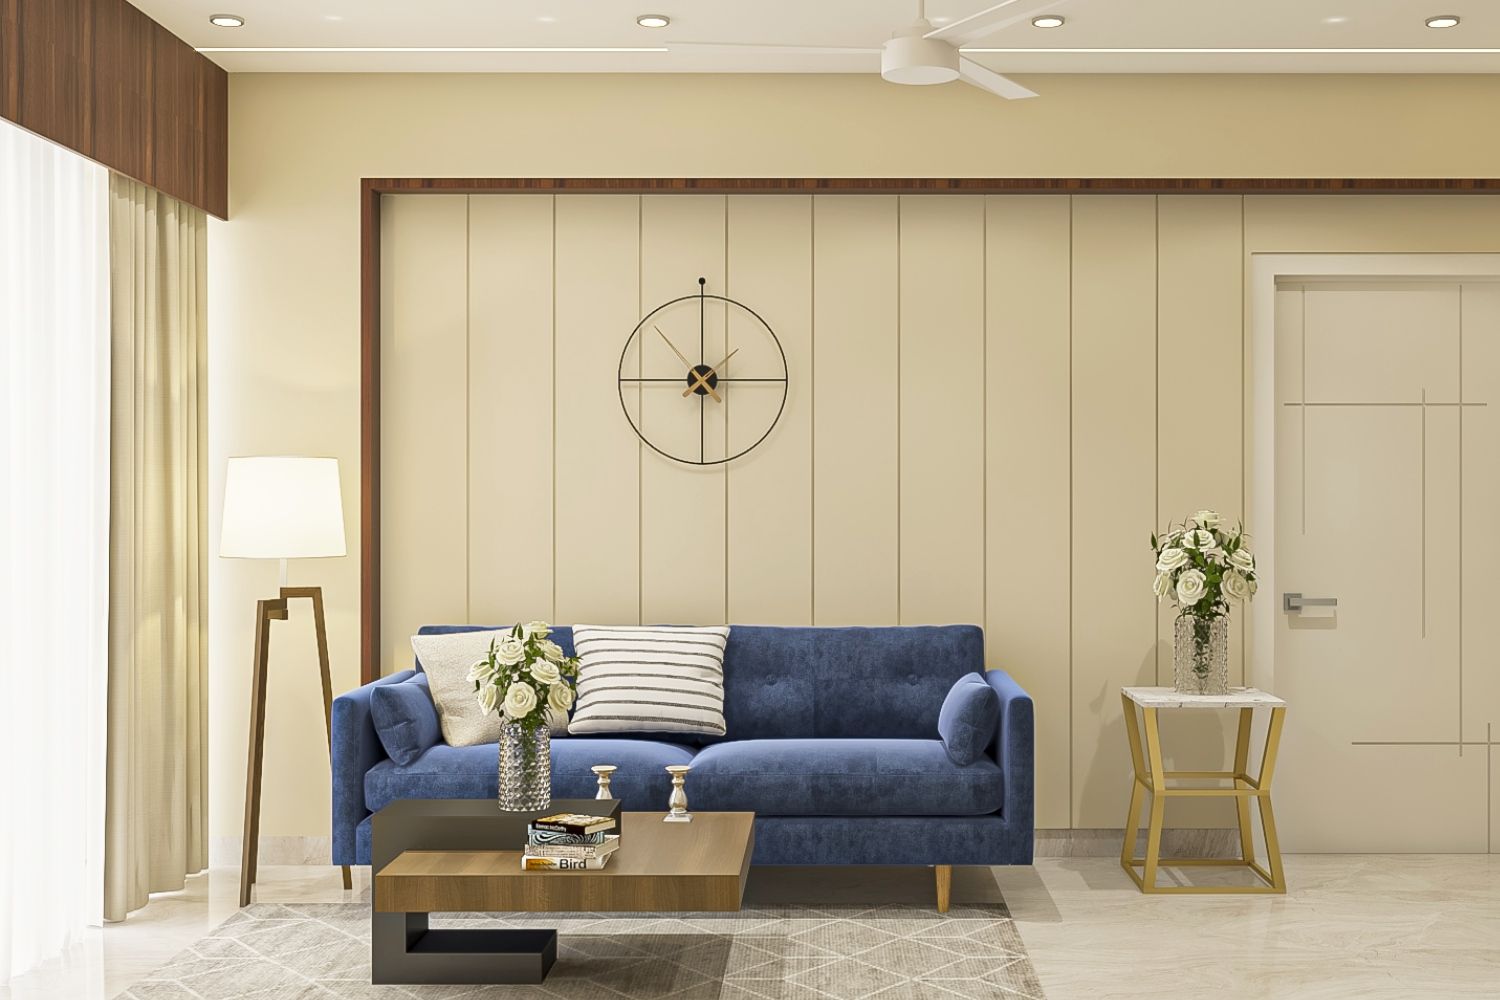 Modern Living Room Design With Dark Blue Velvet Sofa And Beige Wall Panel With Grooves